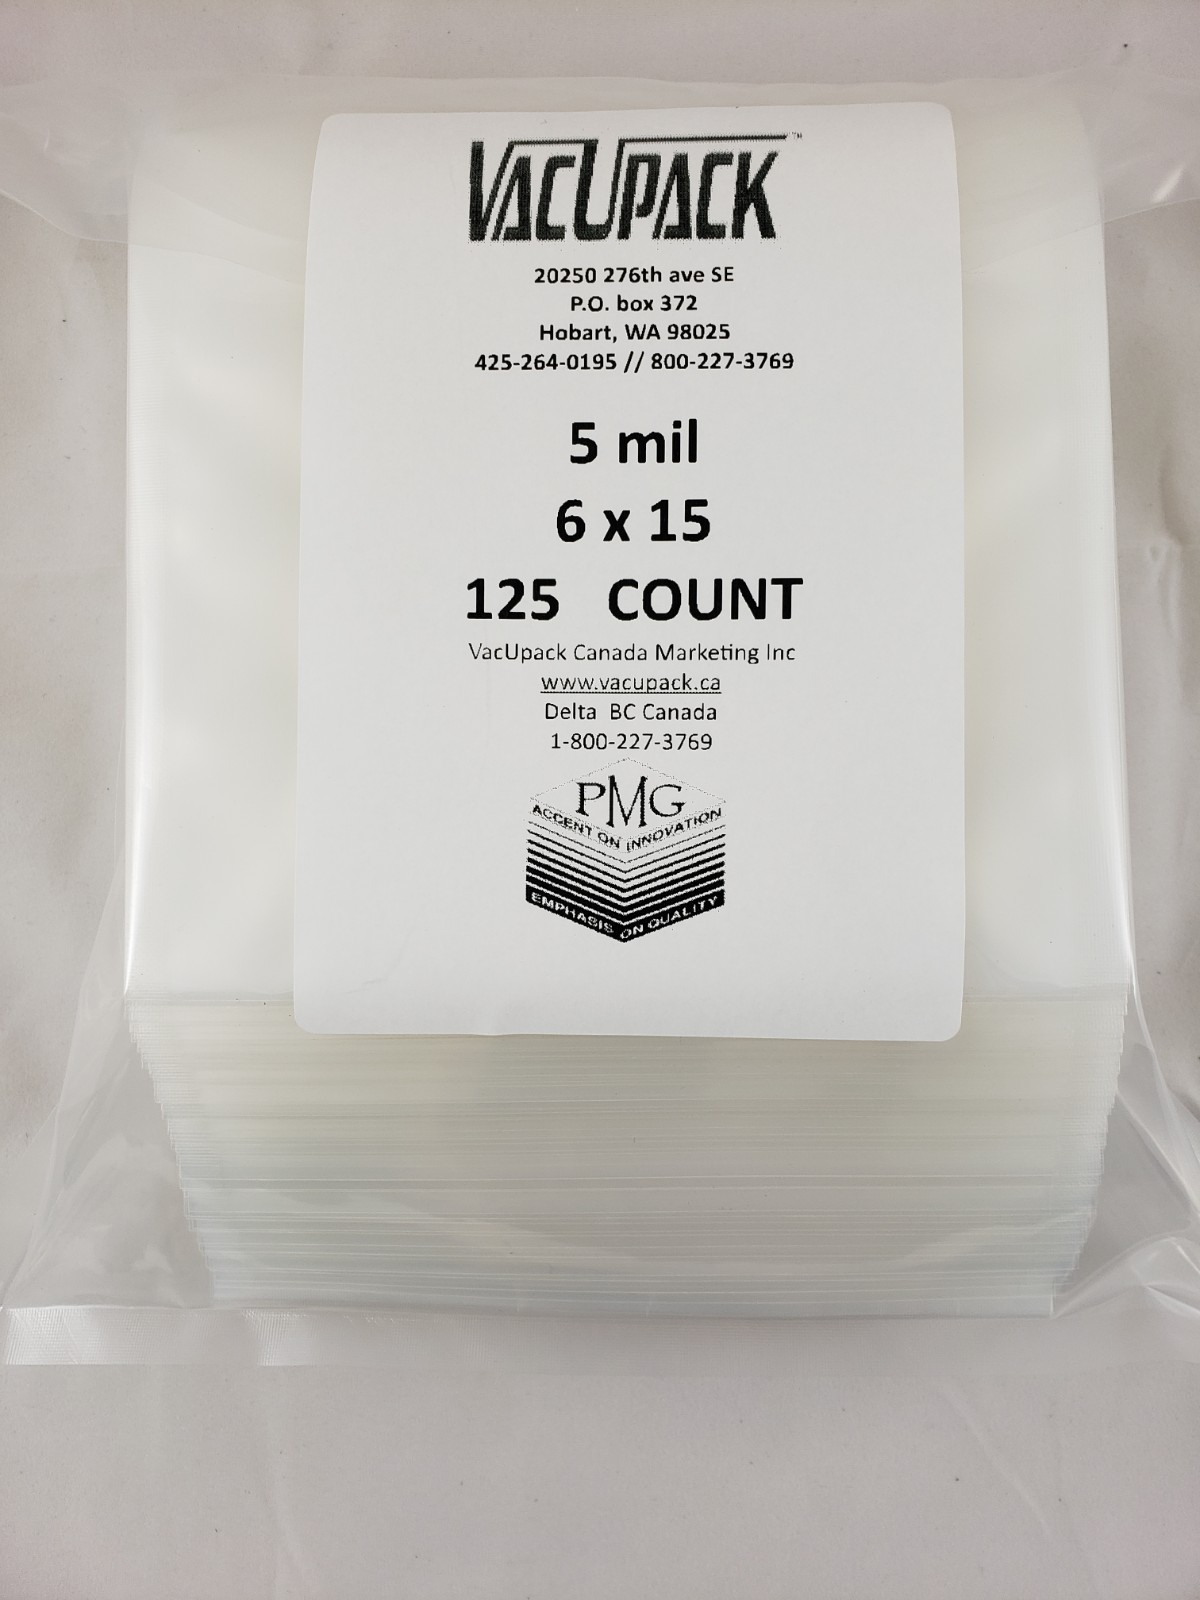 6 x 10 FlairPak 500 Chamber Vacuum Seal Pouches (5 Mil) - Case